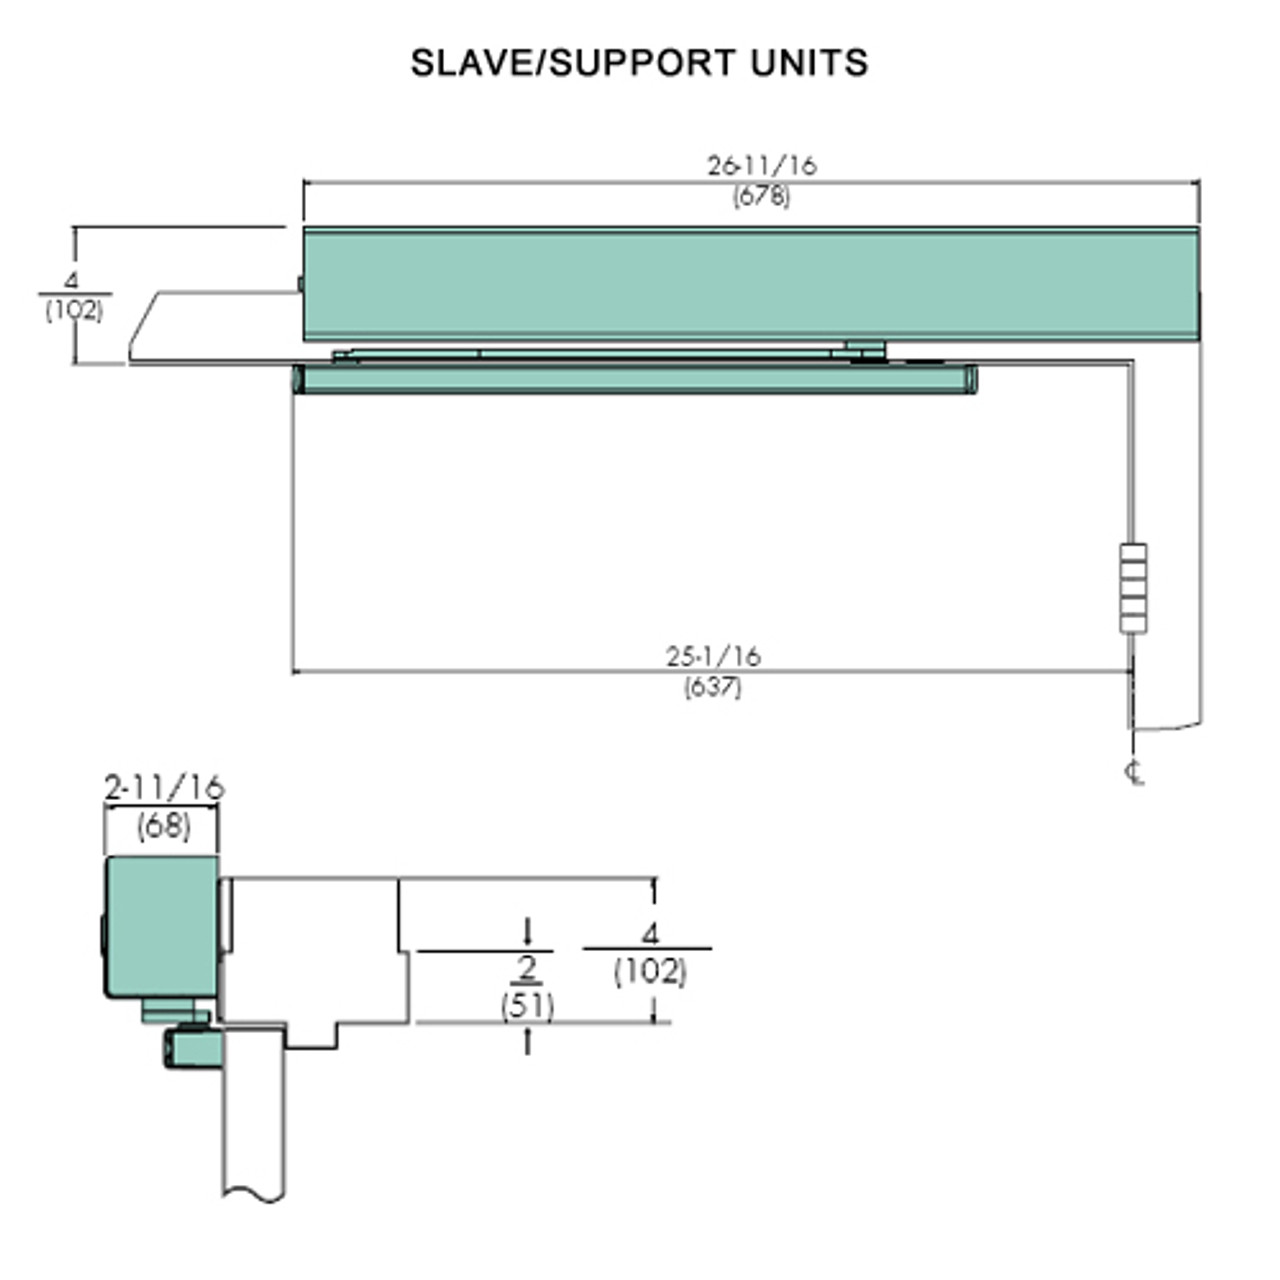 7215MPSO-RH-24VDC-691 Norton 7200 Series Electromechanical Closer and Holder with Rigid Arm Slide Track Slave/Support Unit in Dull Bronze Finish